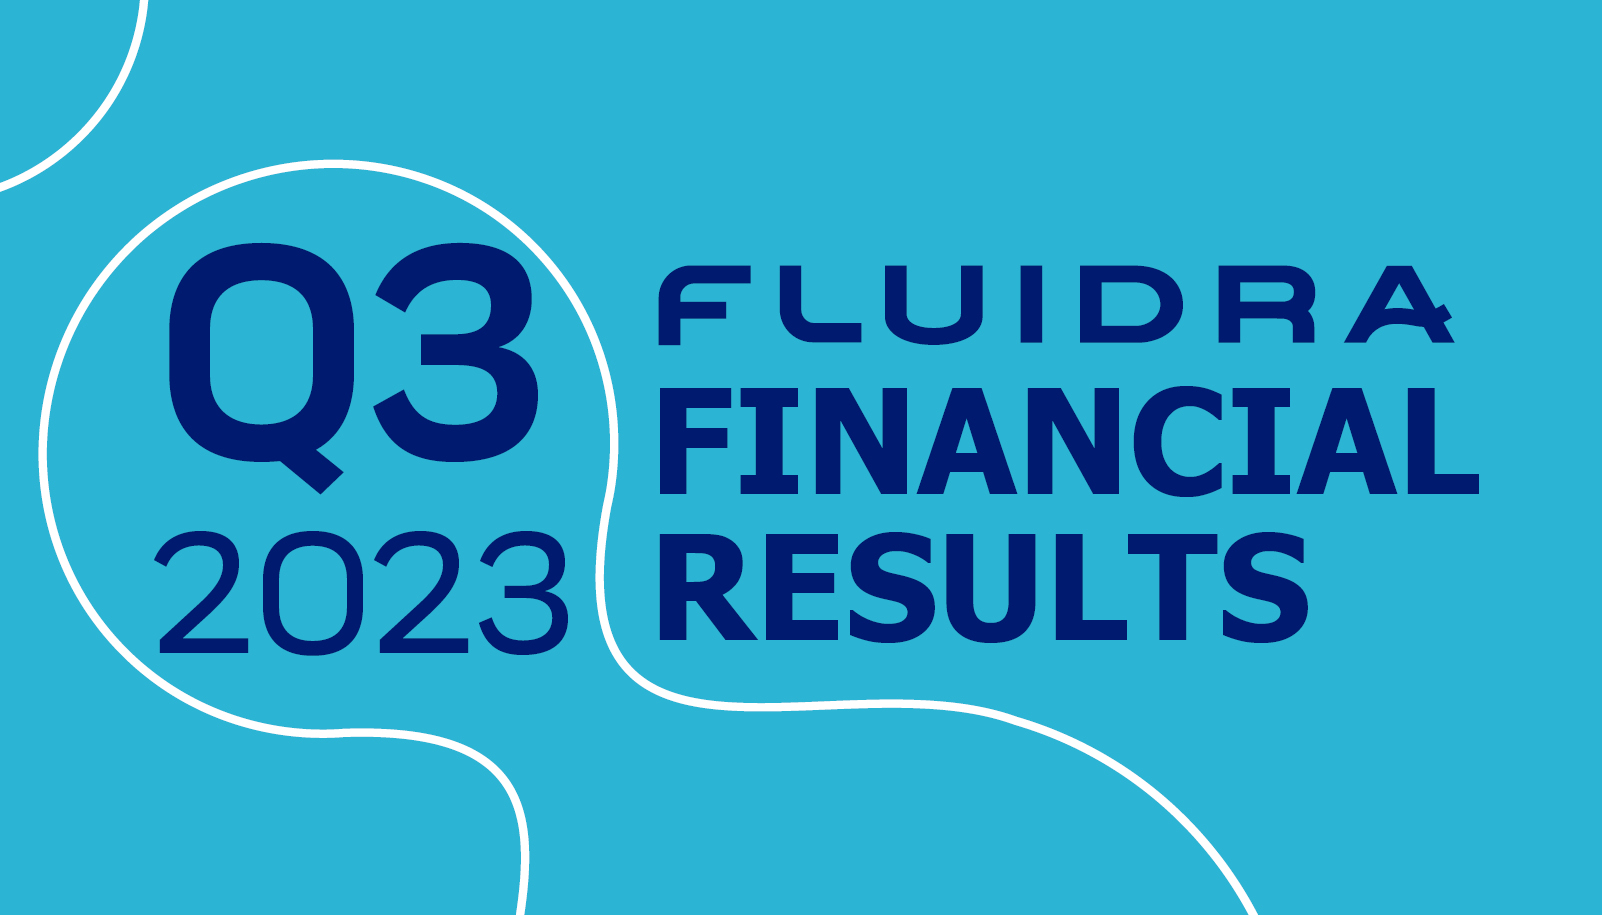 Fluidra achieves sales of €1,623 million in the first nine months of 2023